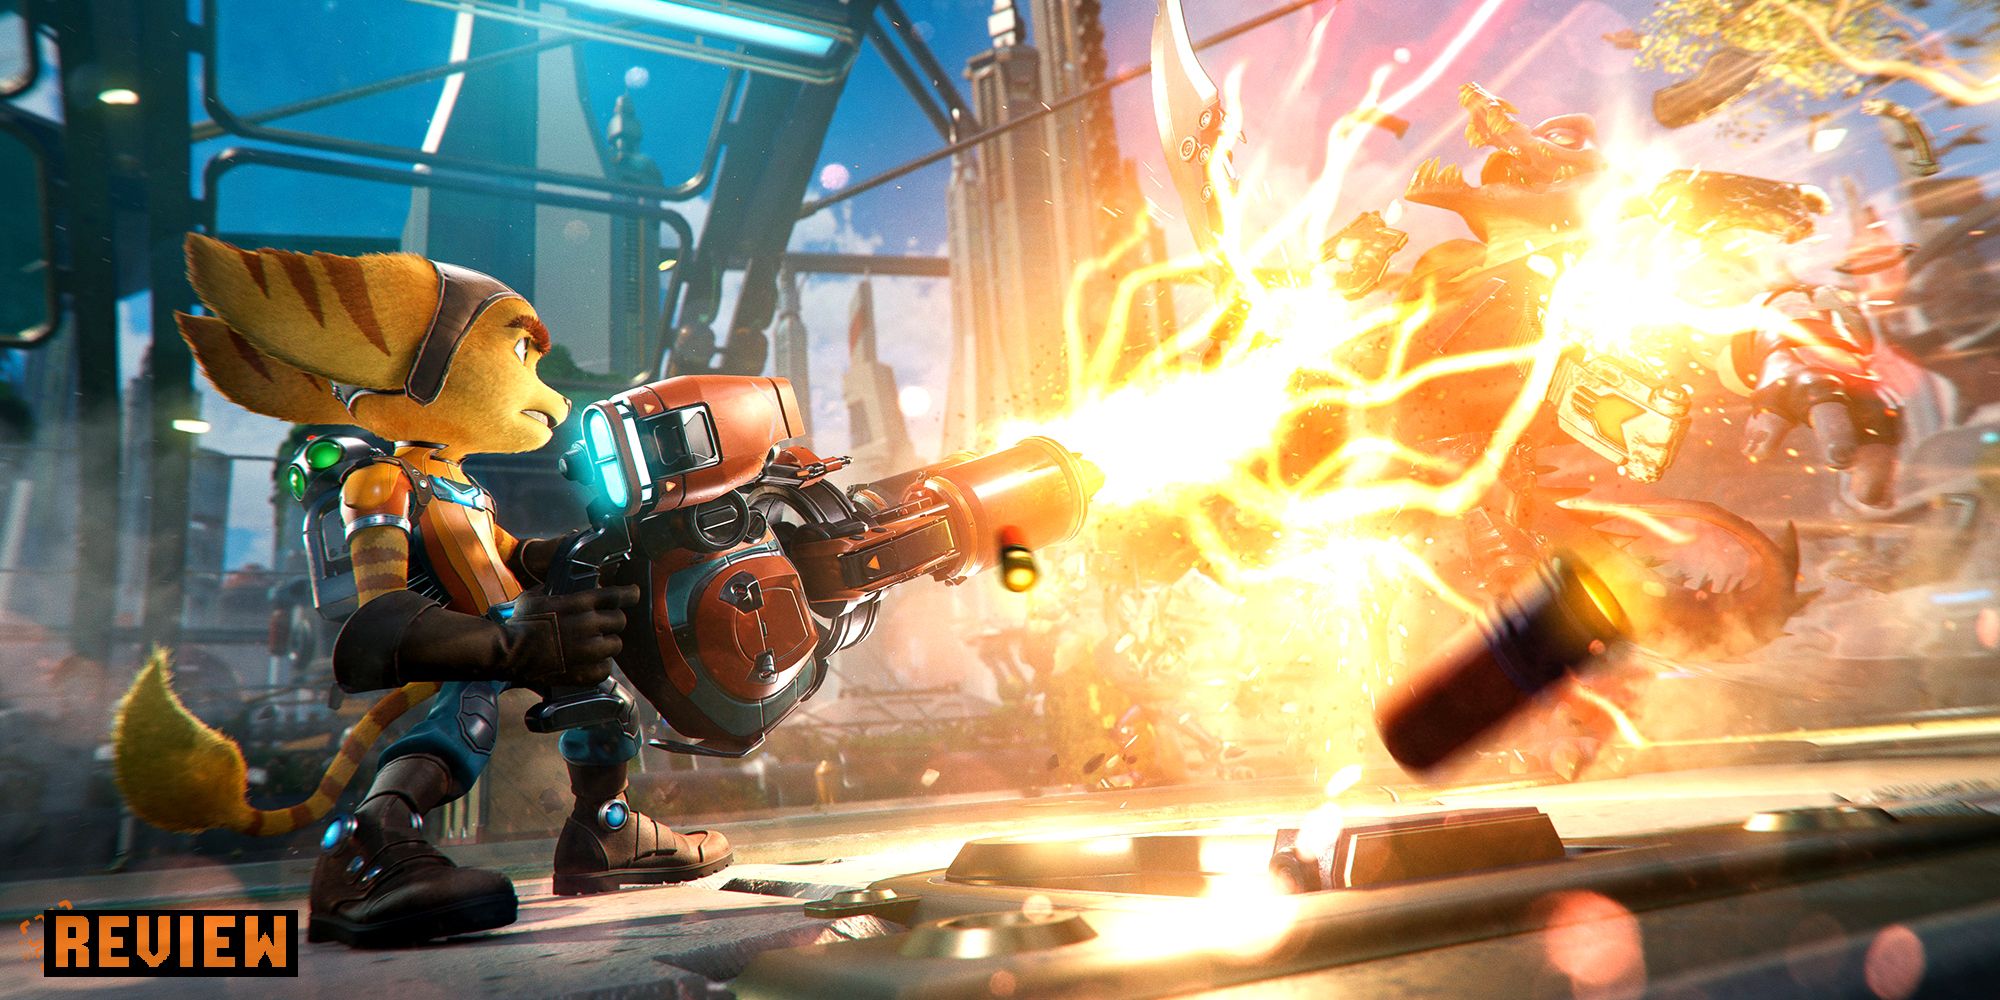 Game screen from Ratchet & Clank Rift Apart